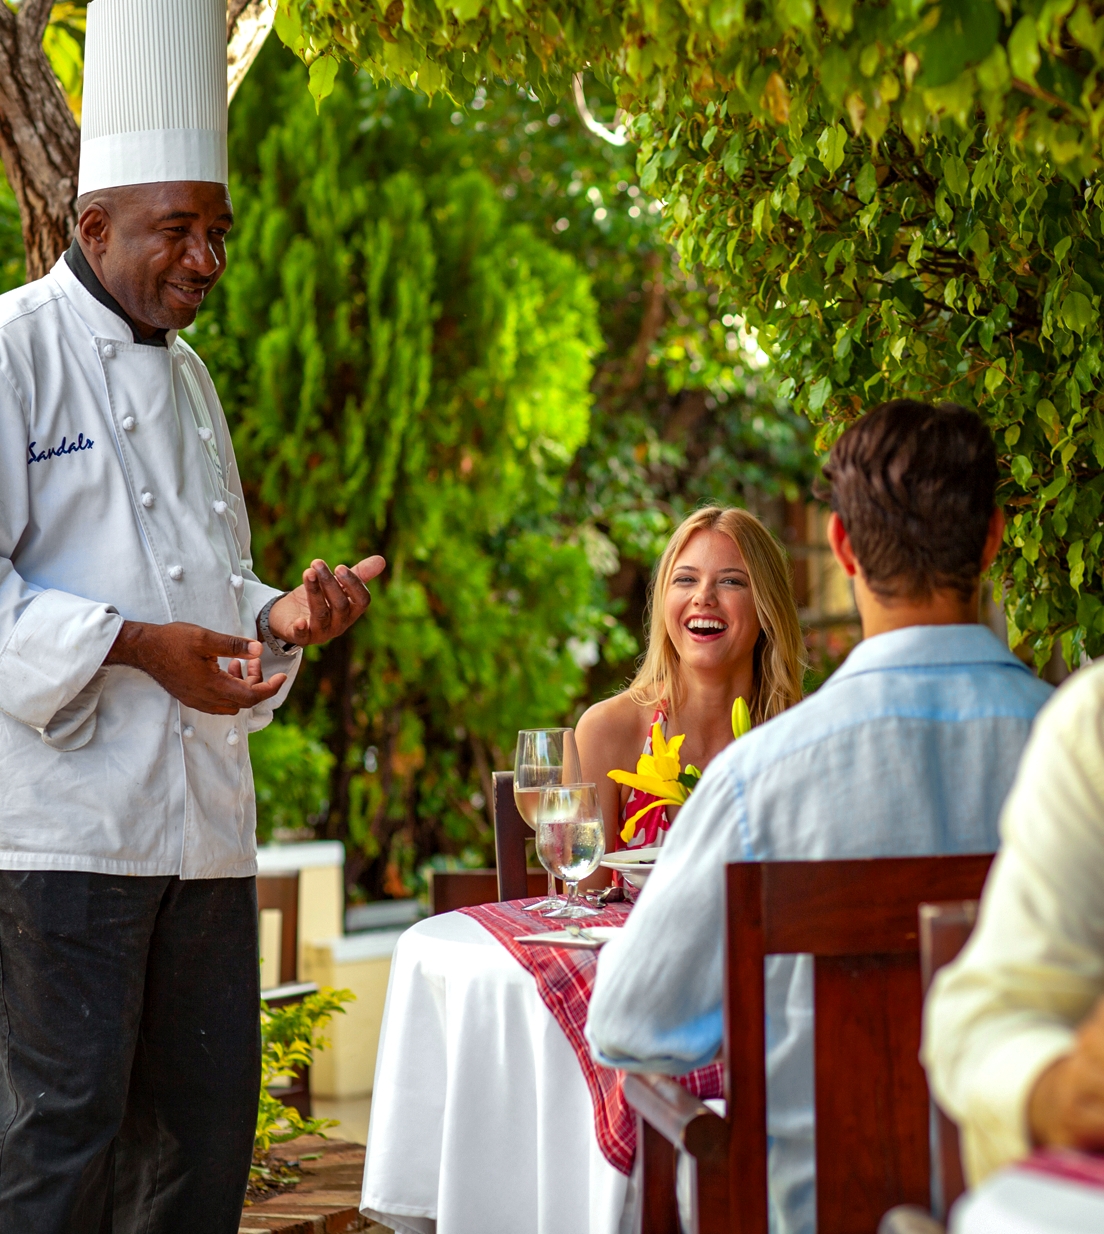 Sandals Montego Bay: 10 Reasons Why It's Perfect For Foodies